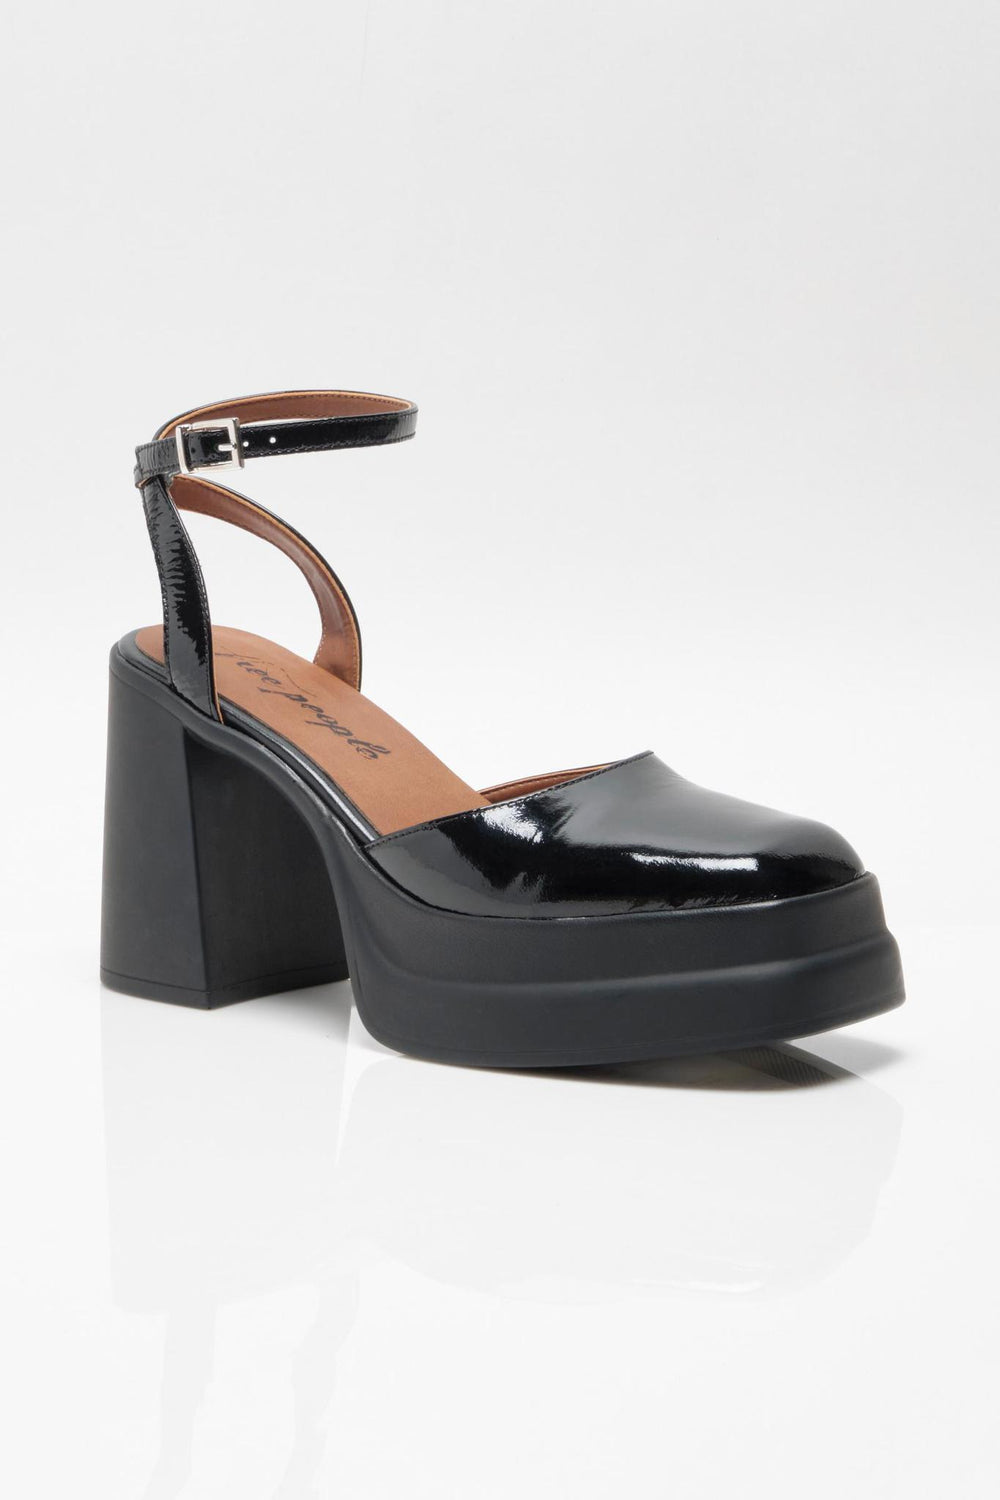 Double Stack Platform Mary Janes